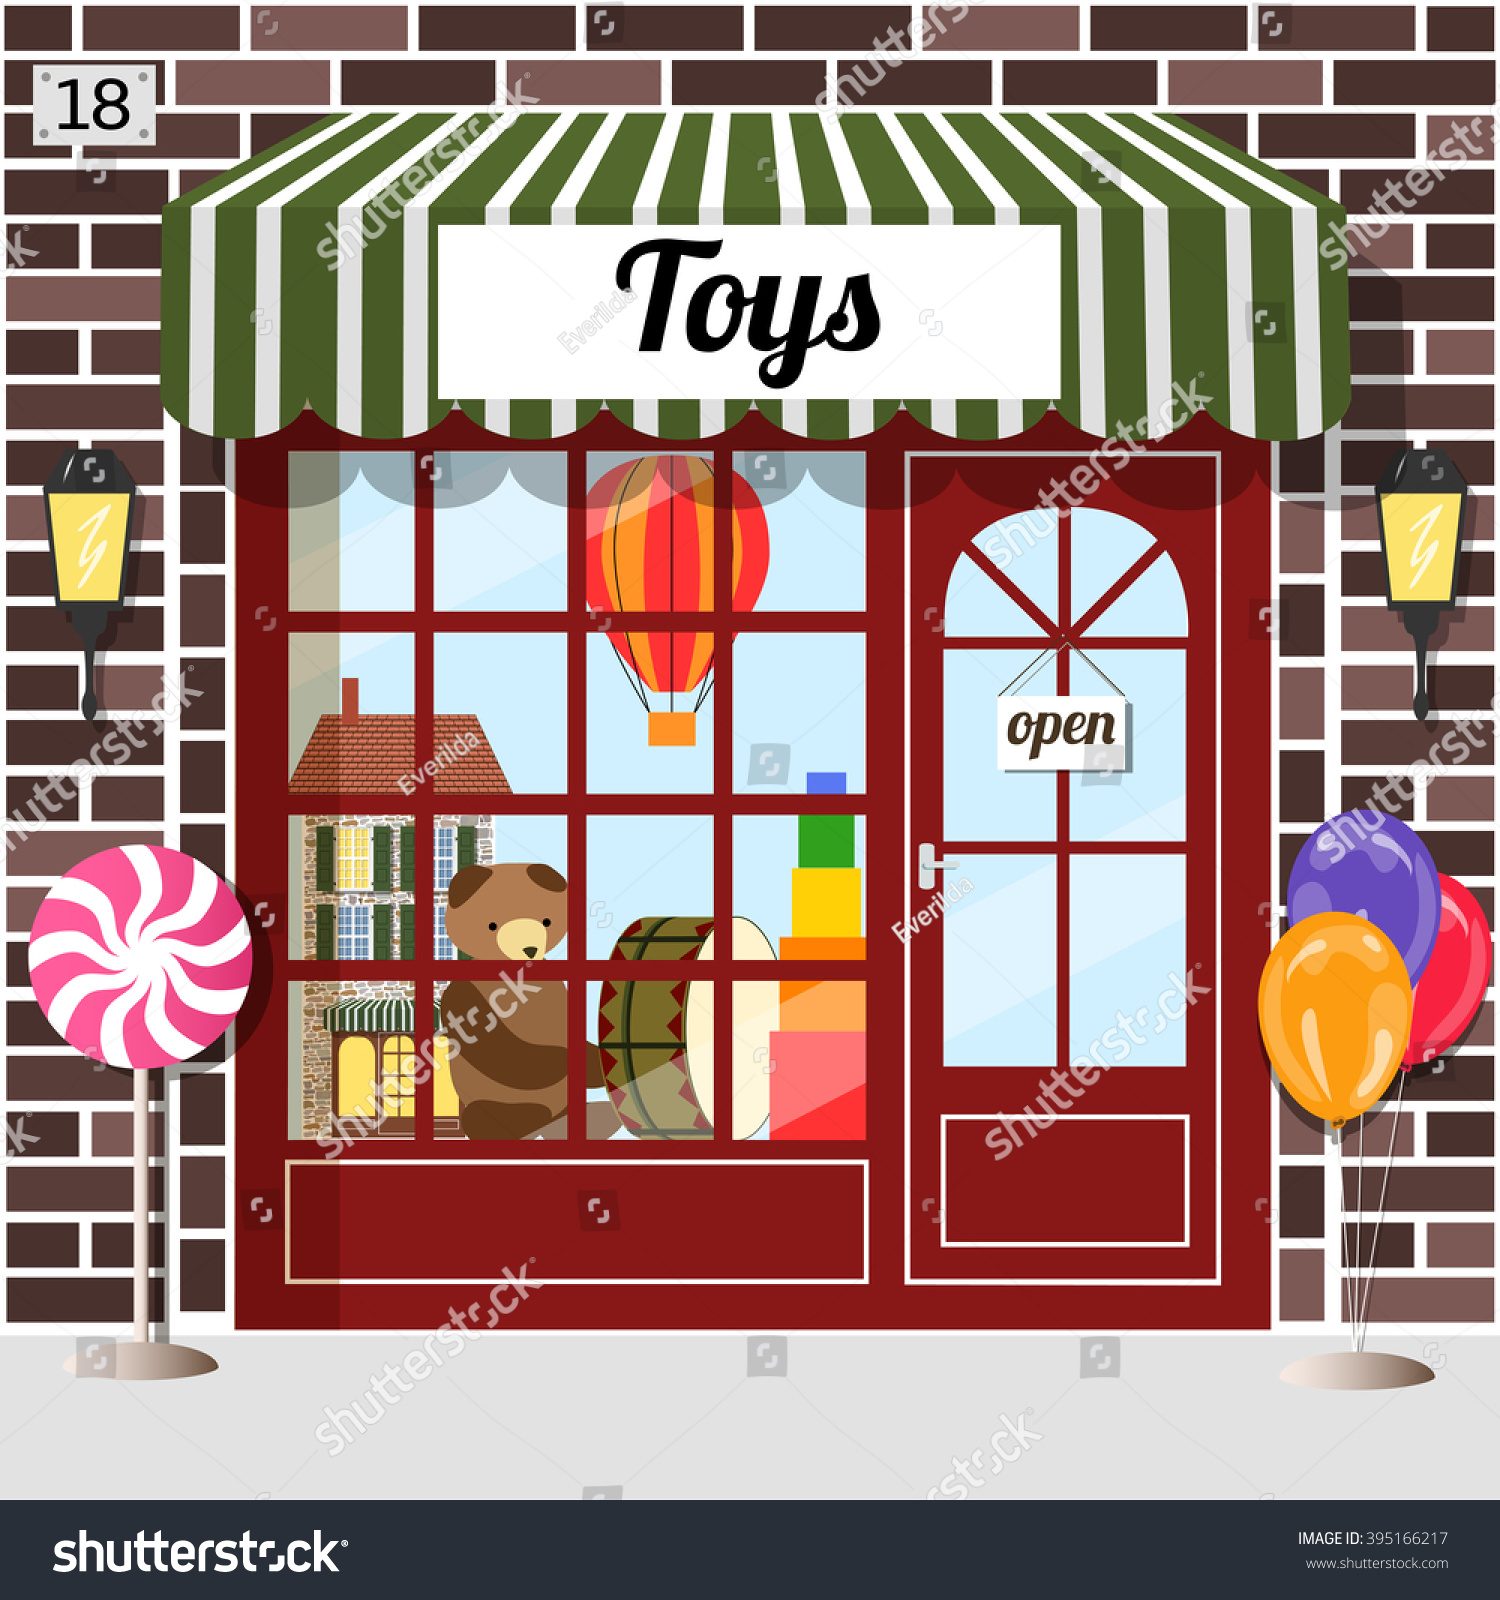 toy store clipart - photo #7